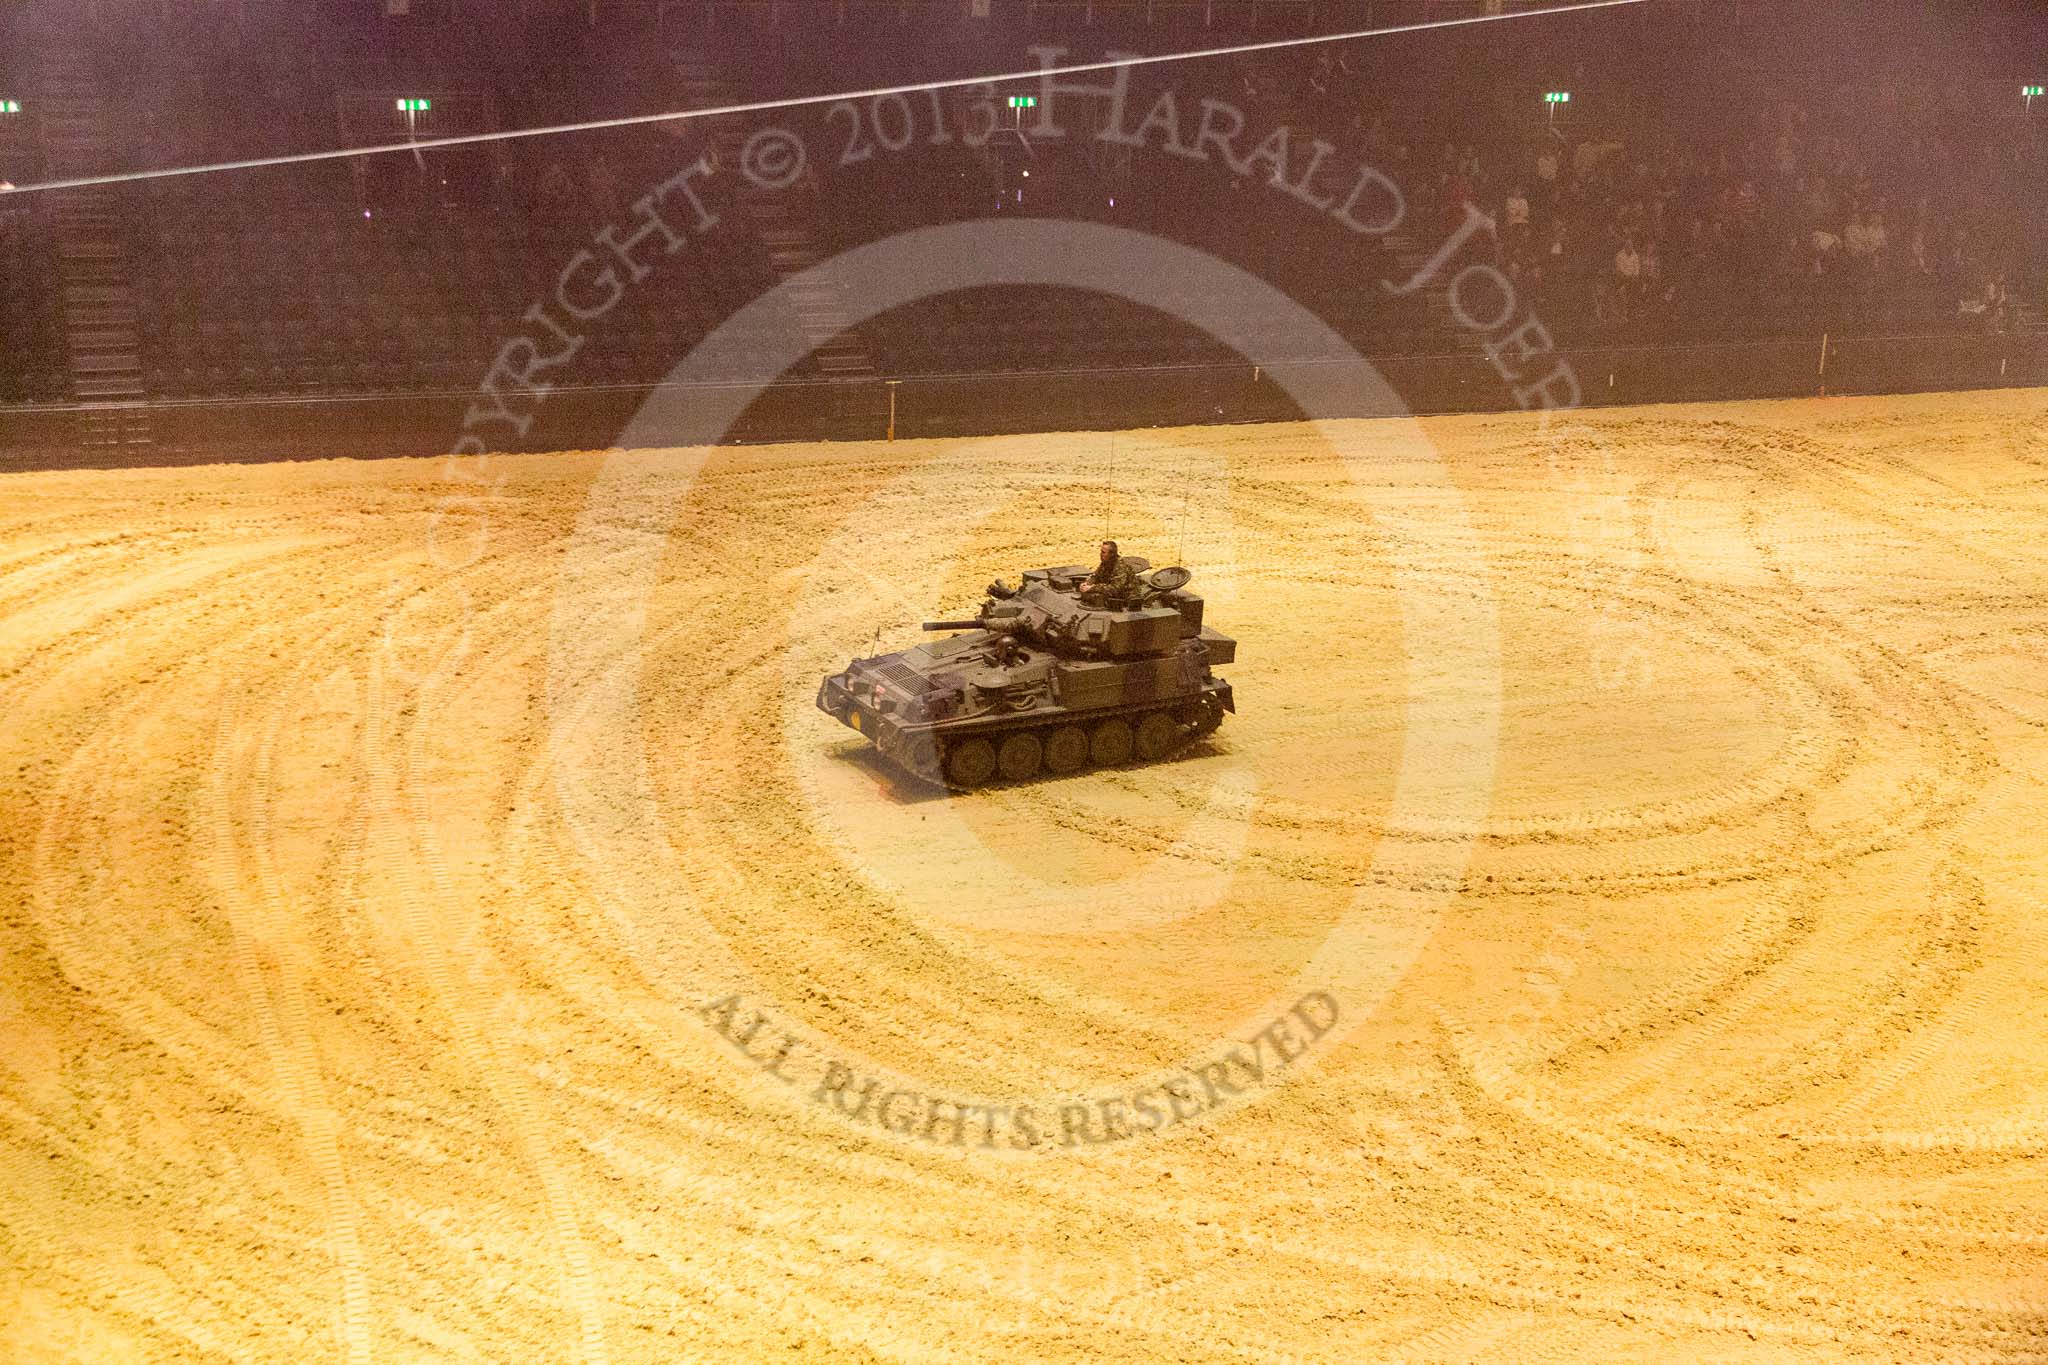 British Military Tournament 2013.
Earls Court,
London SW5,

United Kingdom,
on 06 December 2013 at 16:23, image #404